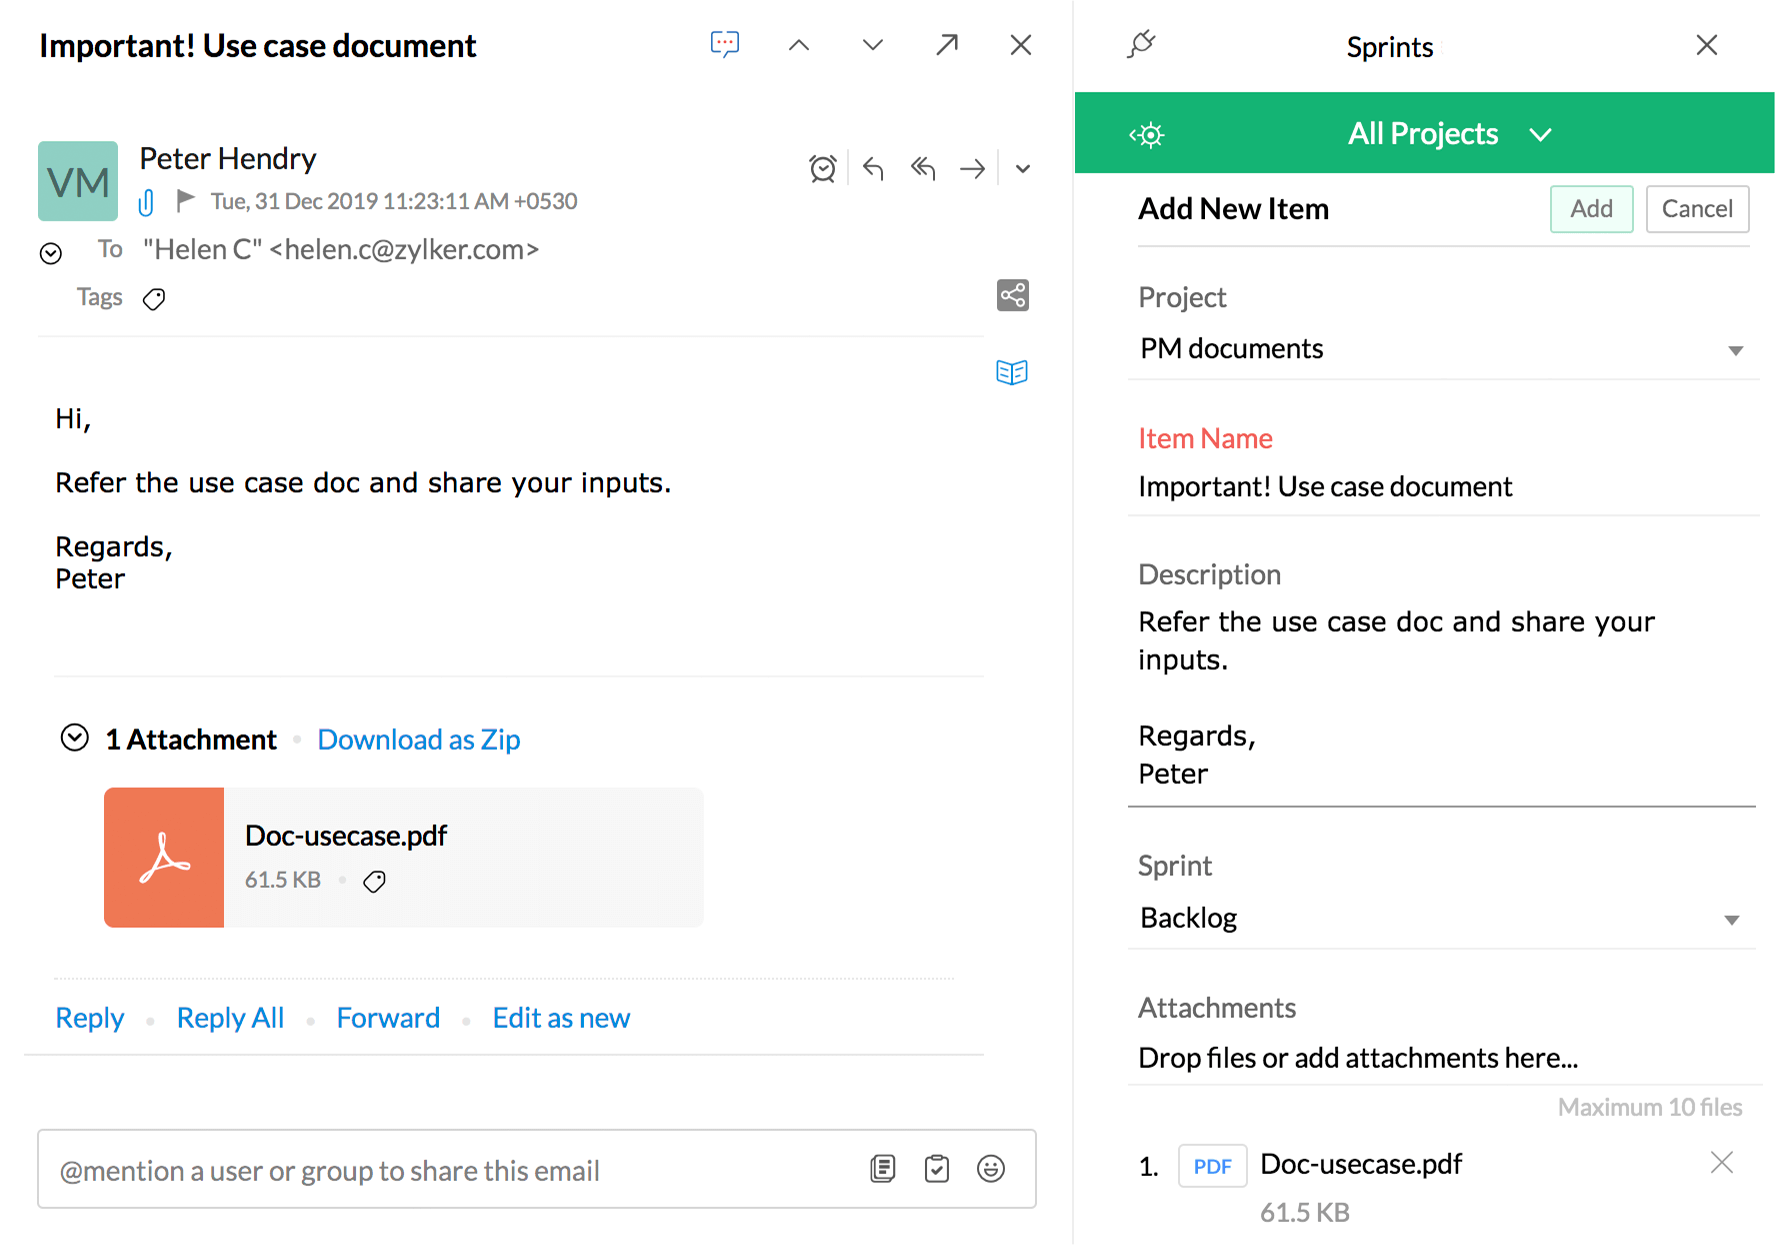 Convert emails into work items